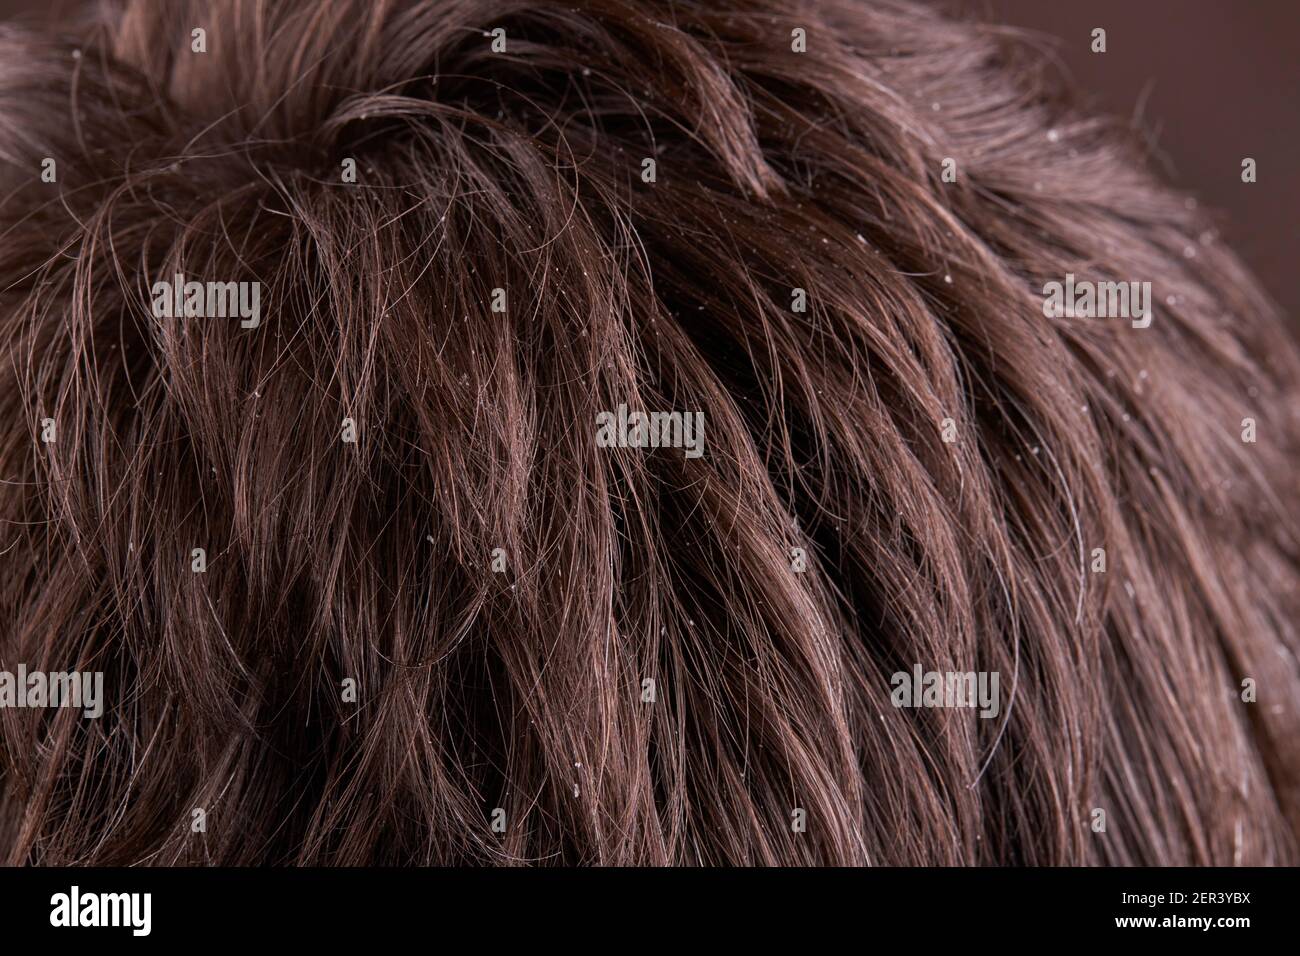 male person with dandruff disease. dermatology health care Stock Photo